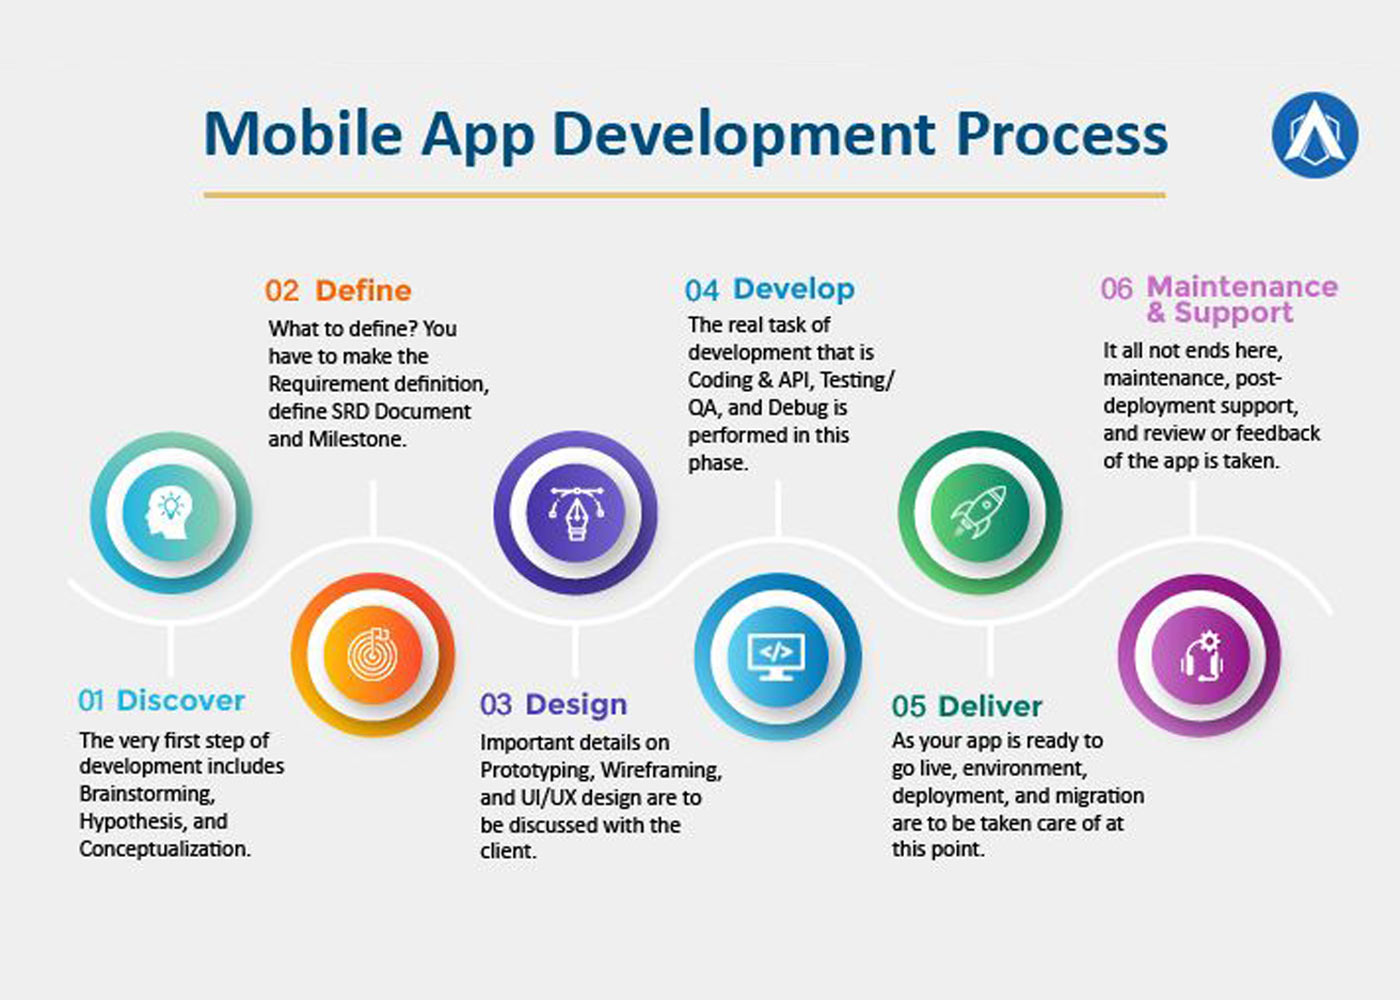 Summary of Mobile App Development Process in 2021